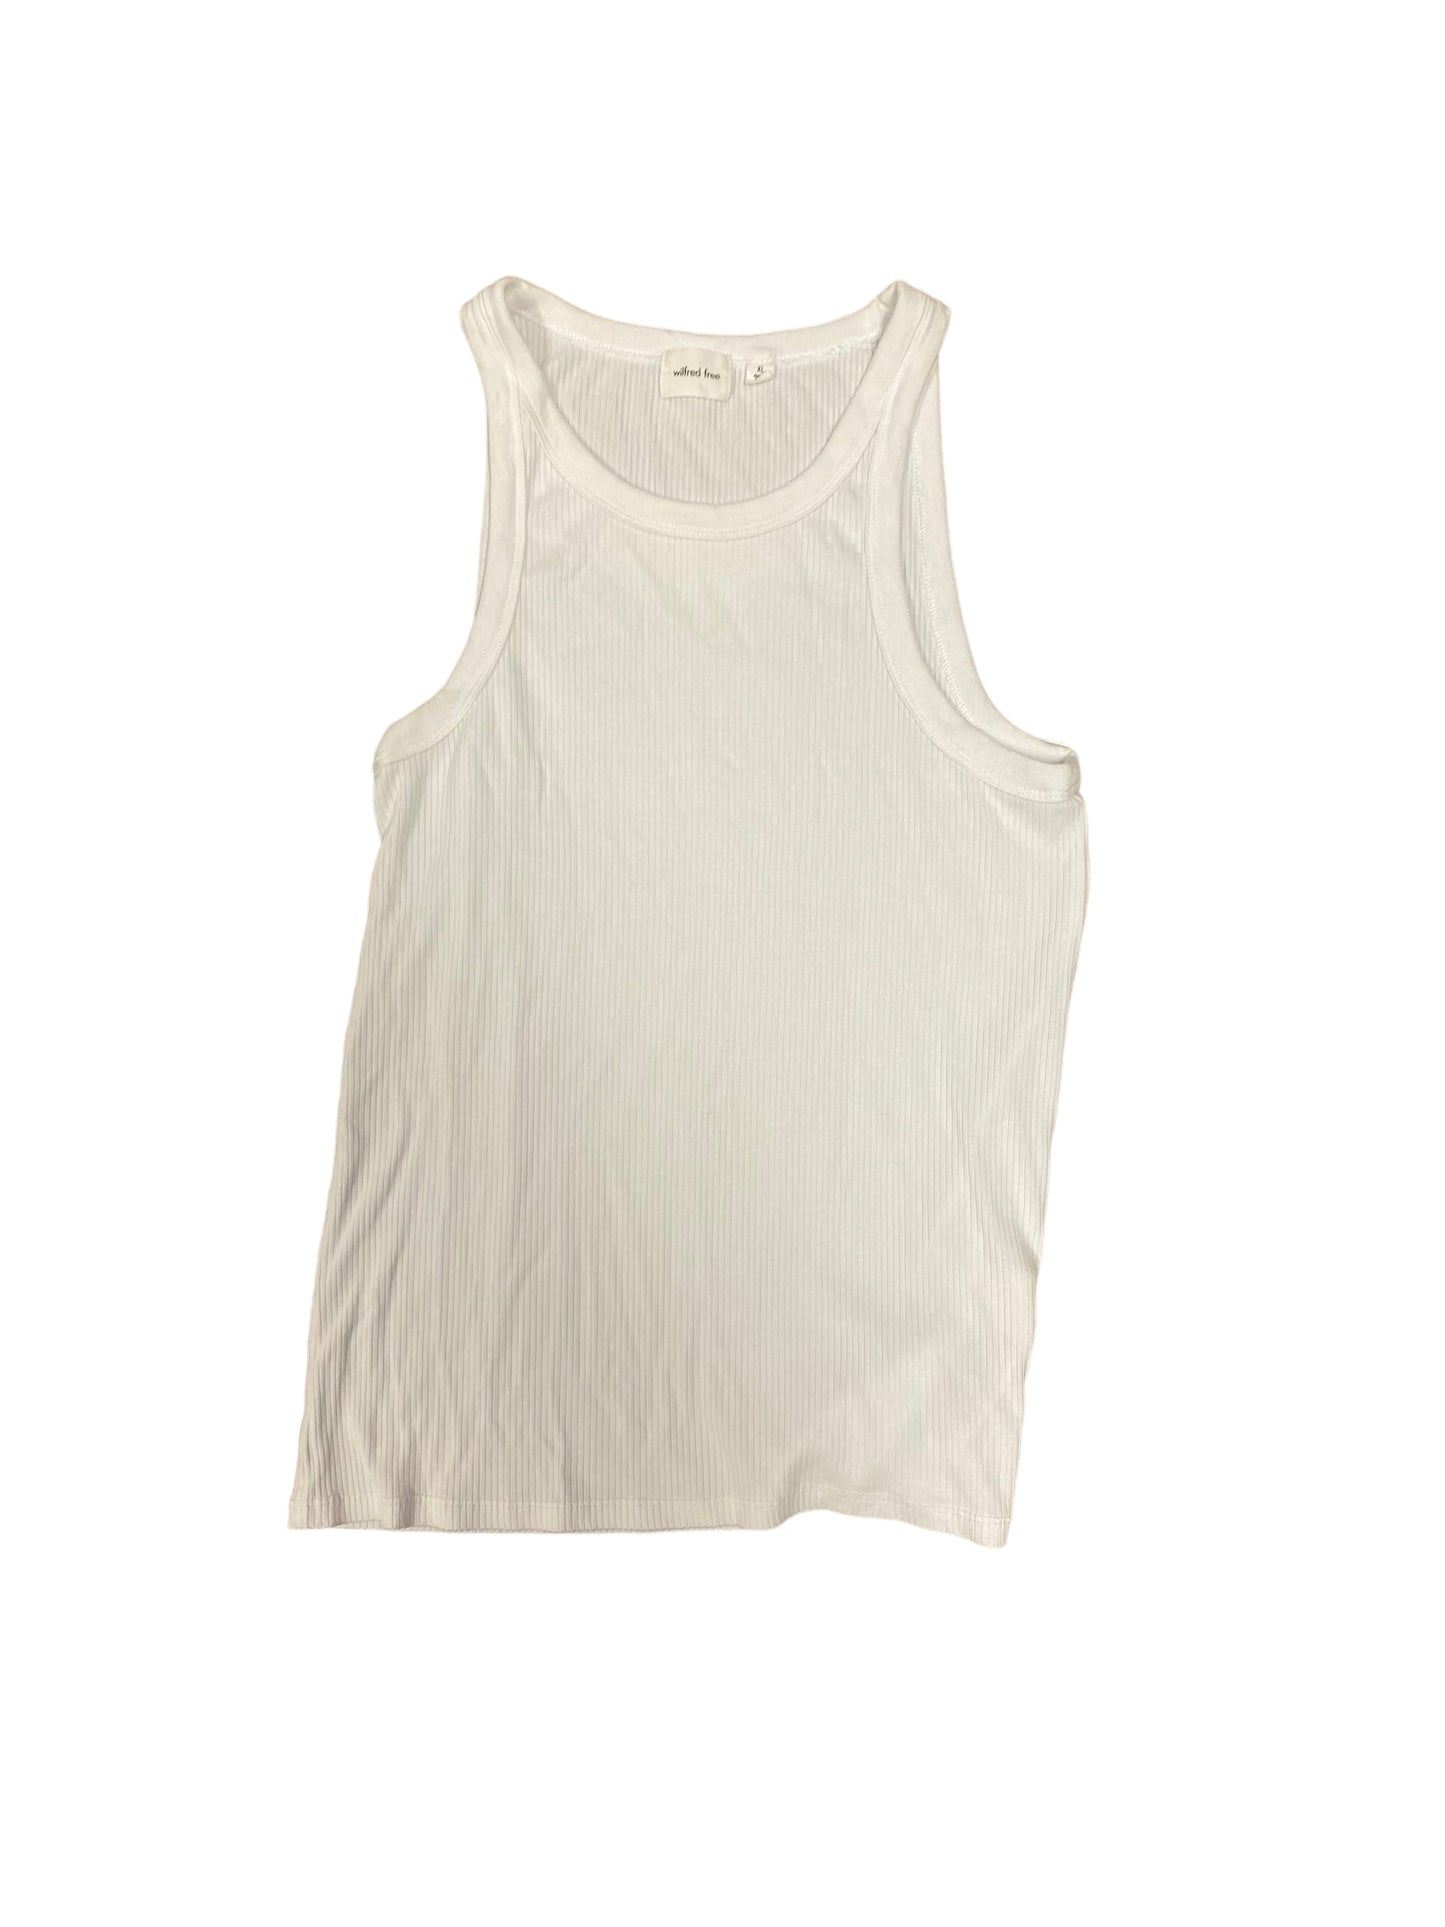 Top Sleeveless Basic By Wilfred  Size: Xl